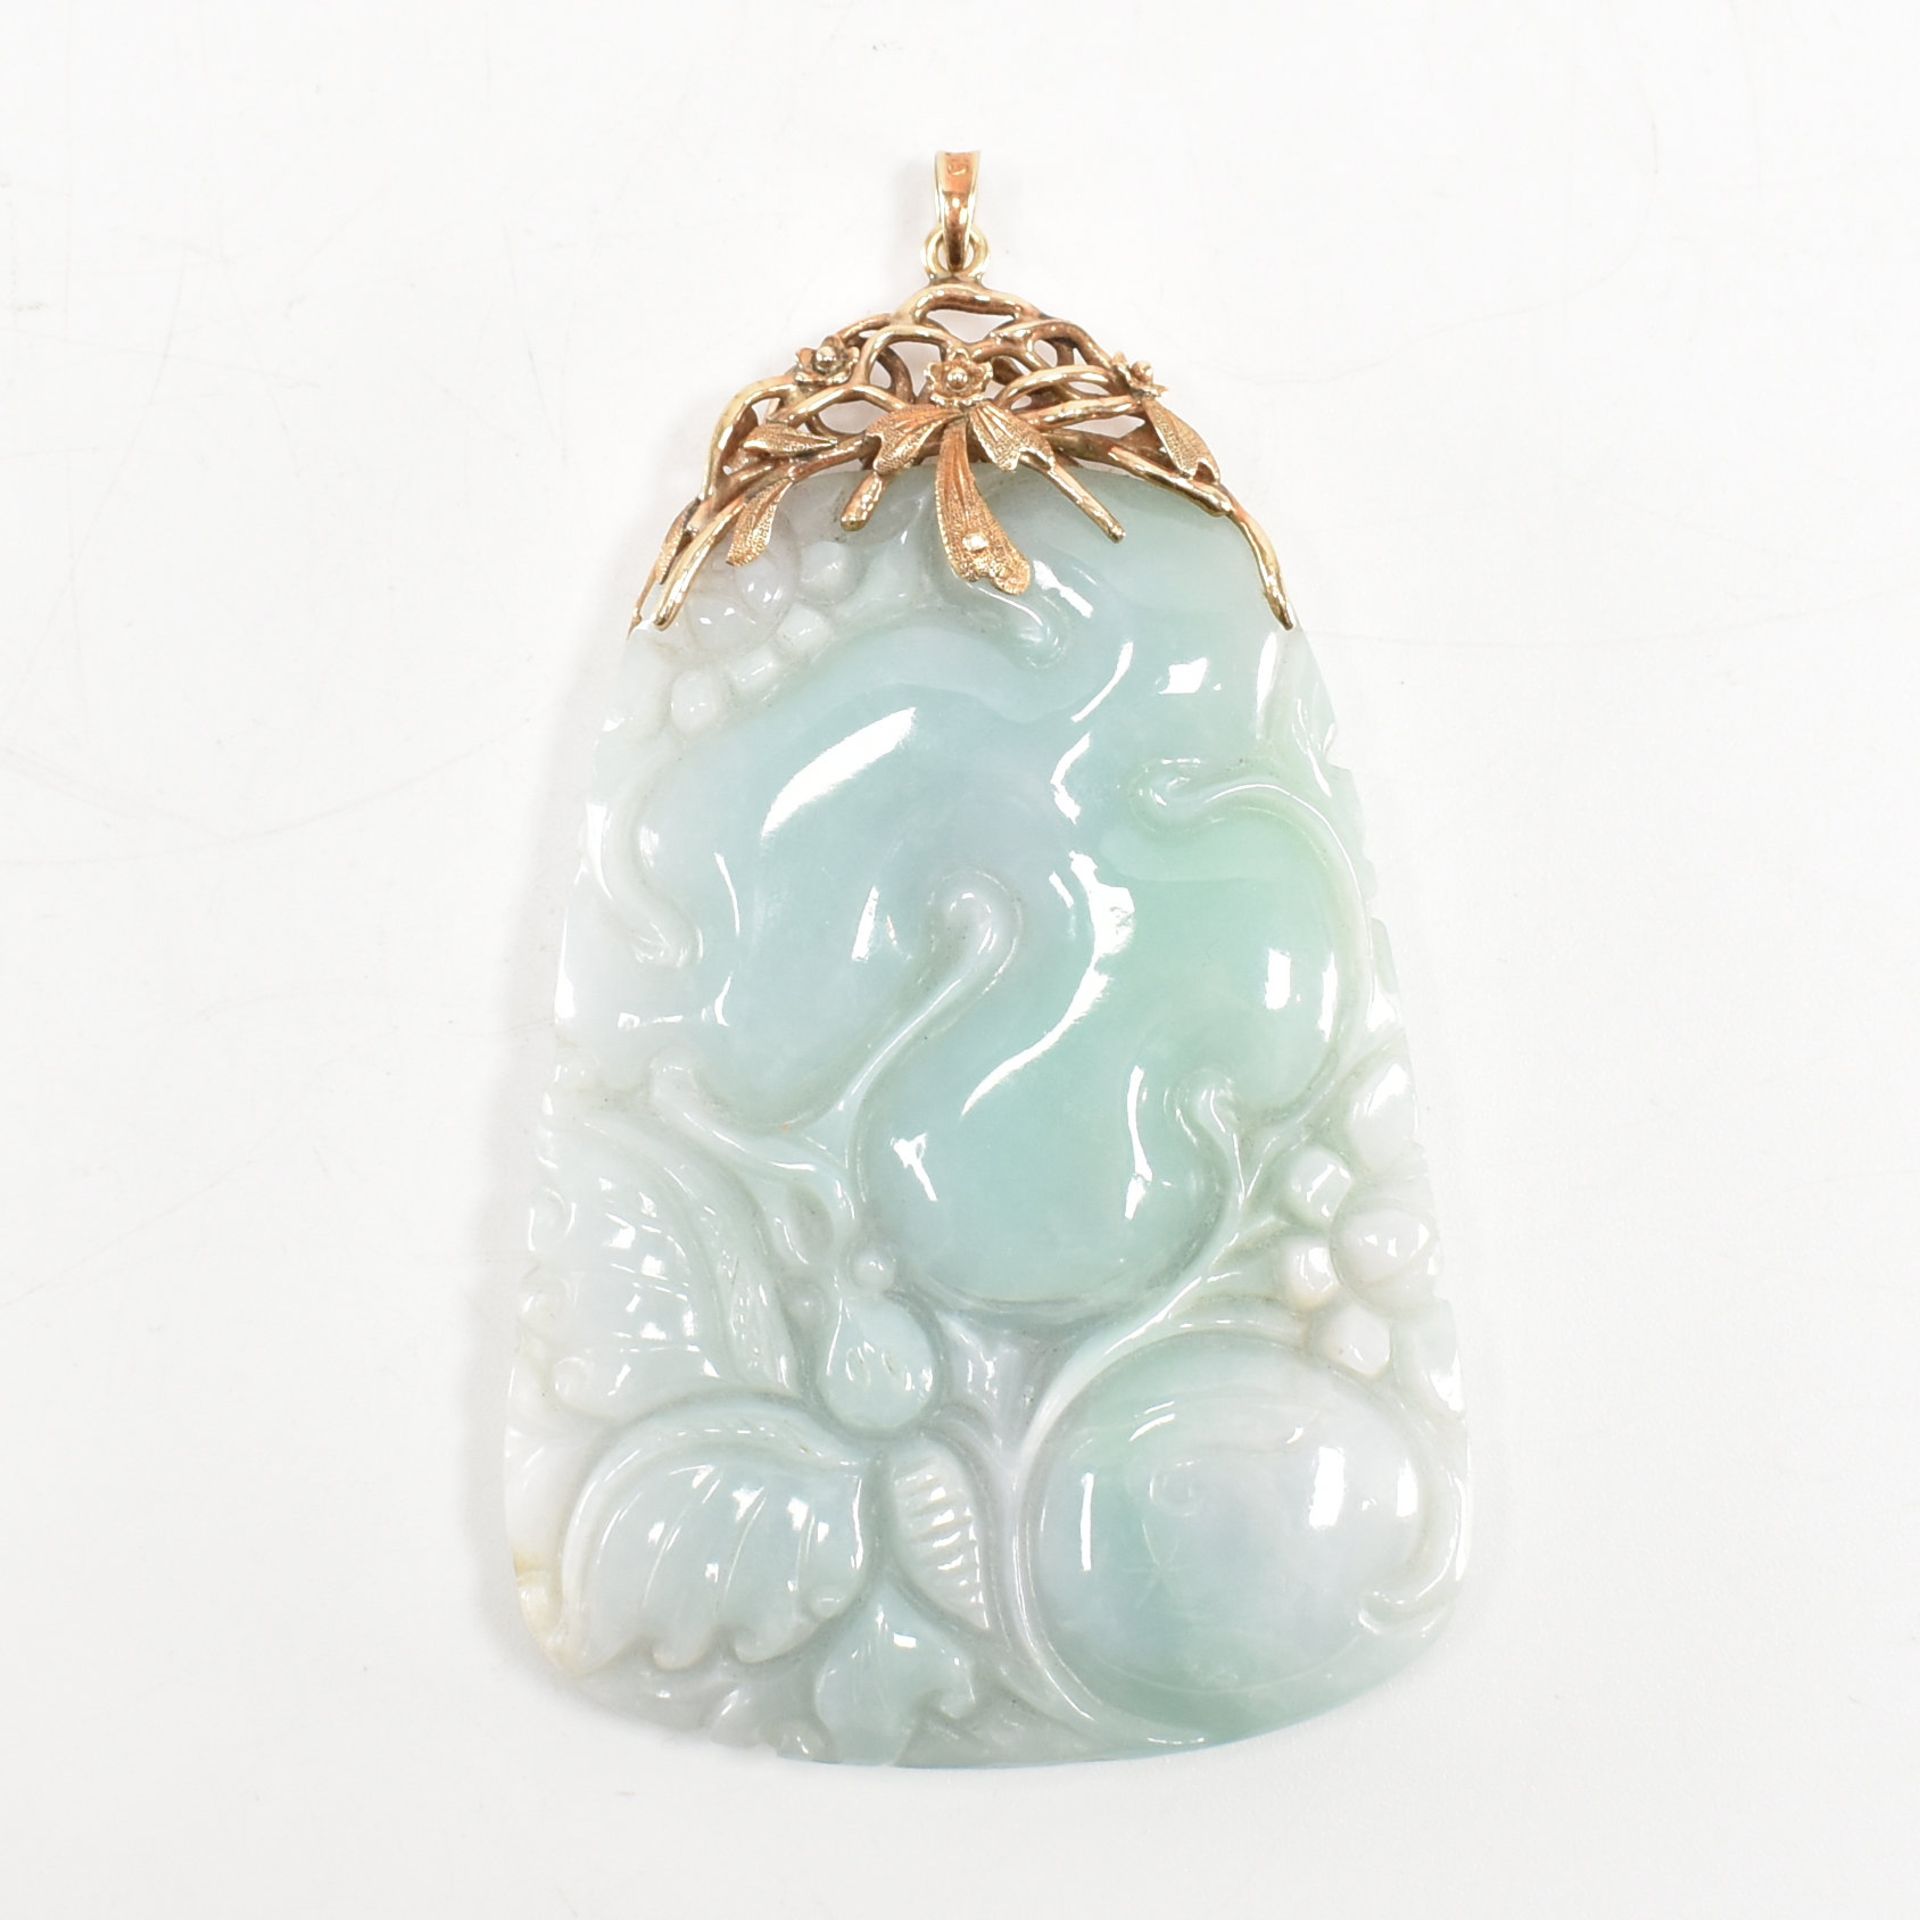 14CT GOLD MOUNTED CARVED JADE PENDANT - Image 2 of 6